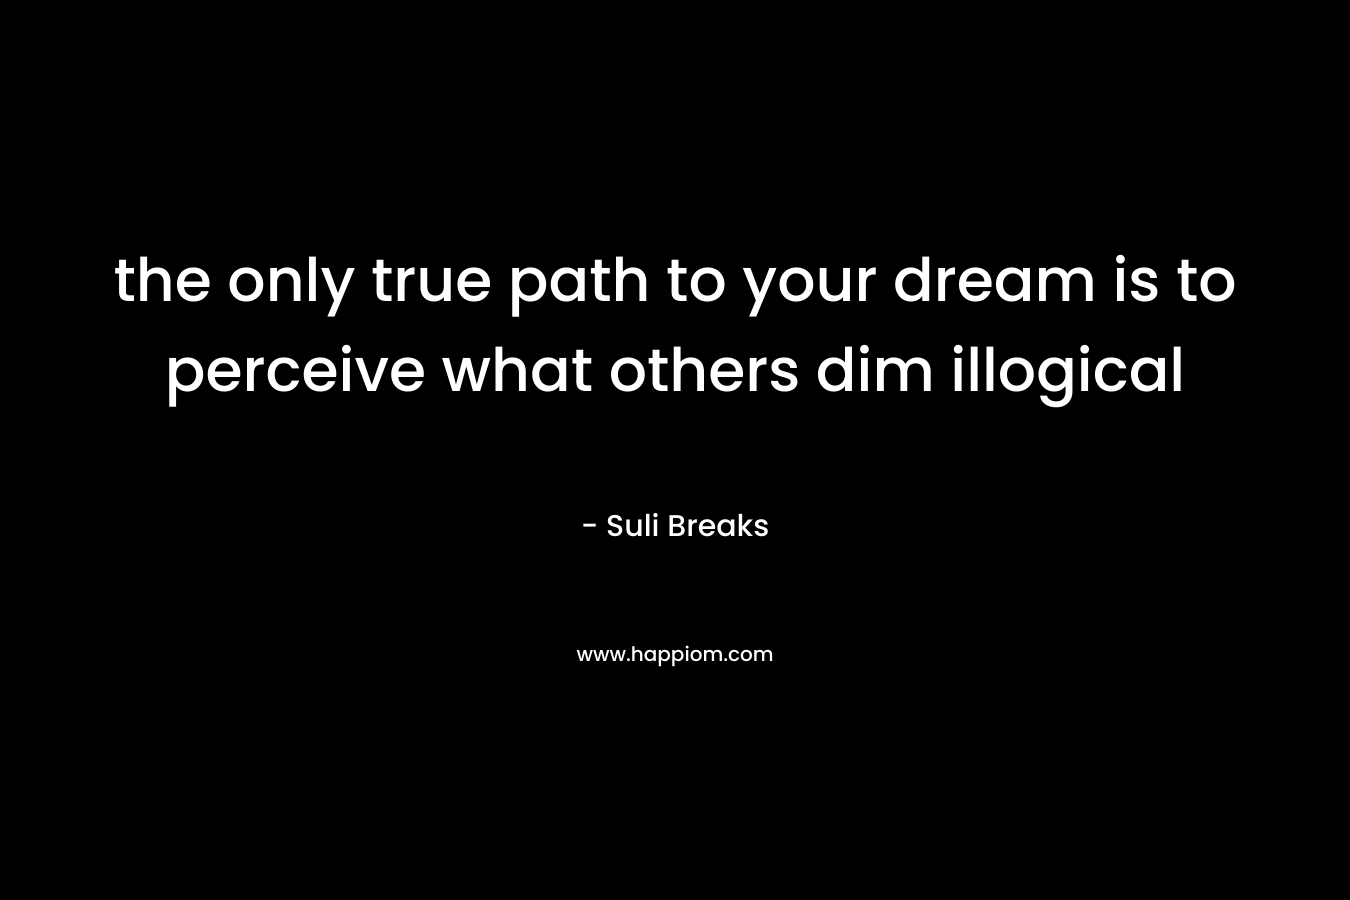 the only true path to your dream is to perceive what others dim illogical